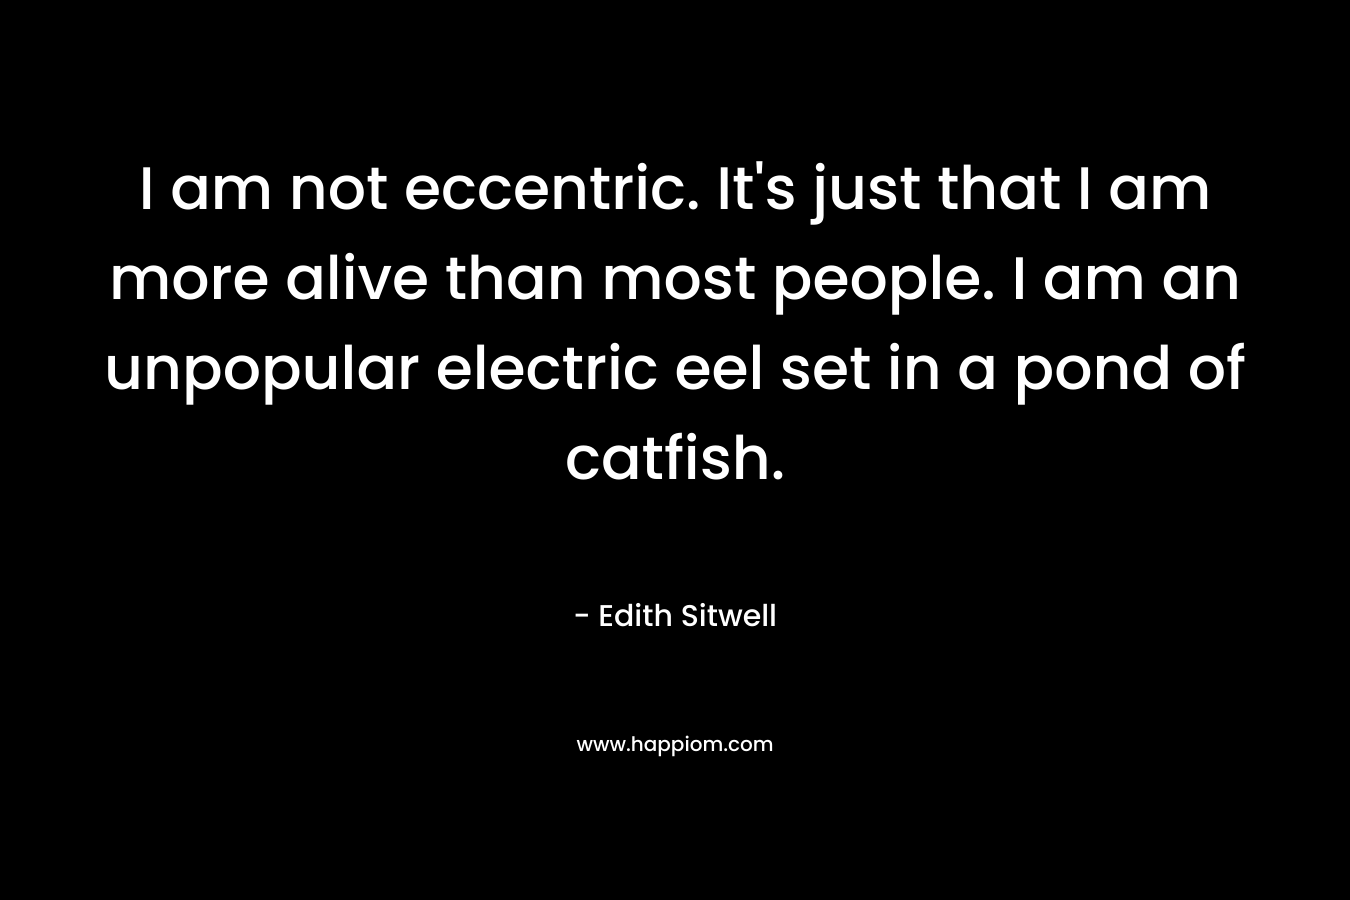 I am not eccentric. It's just that I am more alive than most people. I am an unpopular electric eel set in a pond of catfish.